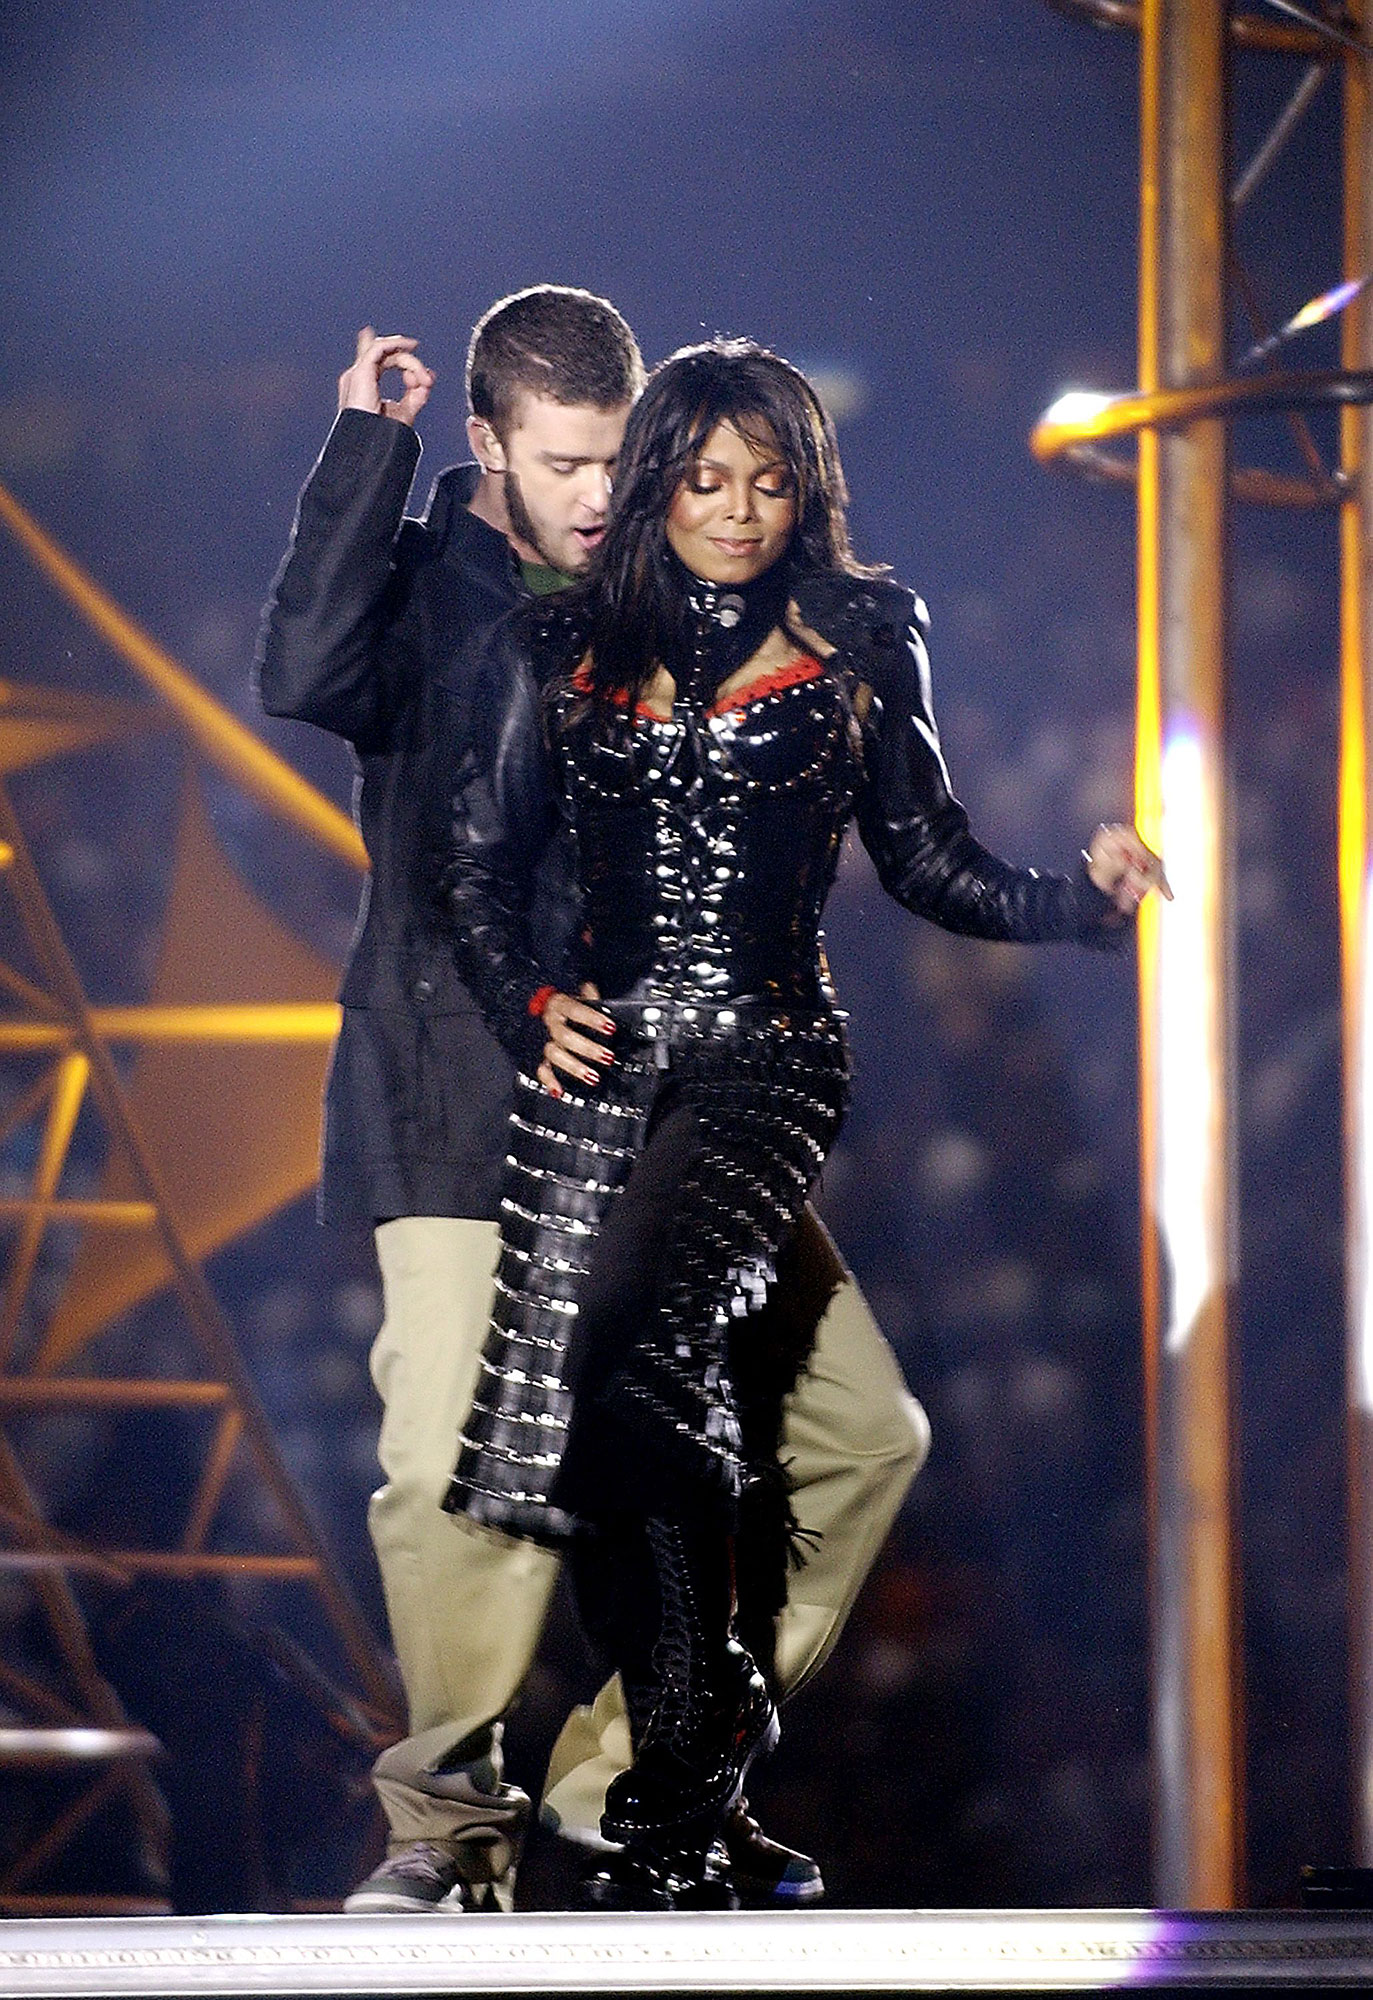 Janet Jackson's hot breast popped out of her dress as singer Justin  Timberlake ripped off one of her chest plates at the end of their half time  performance at the Super Bowl